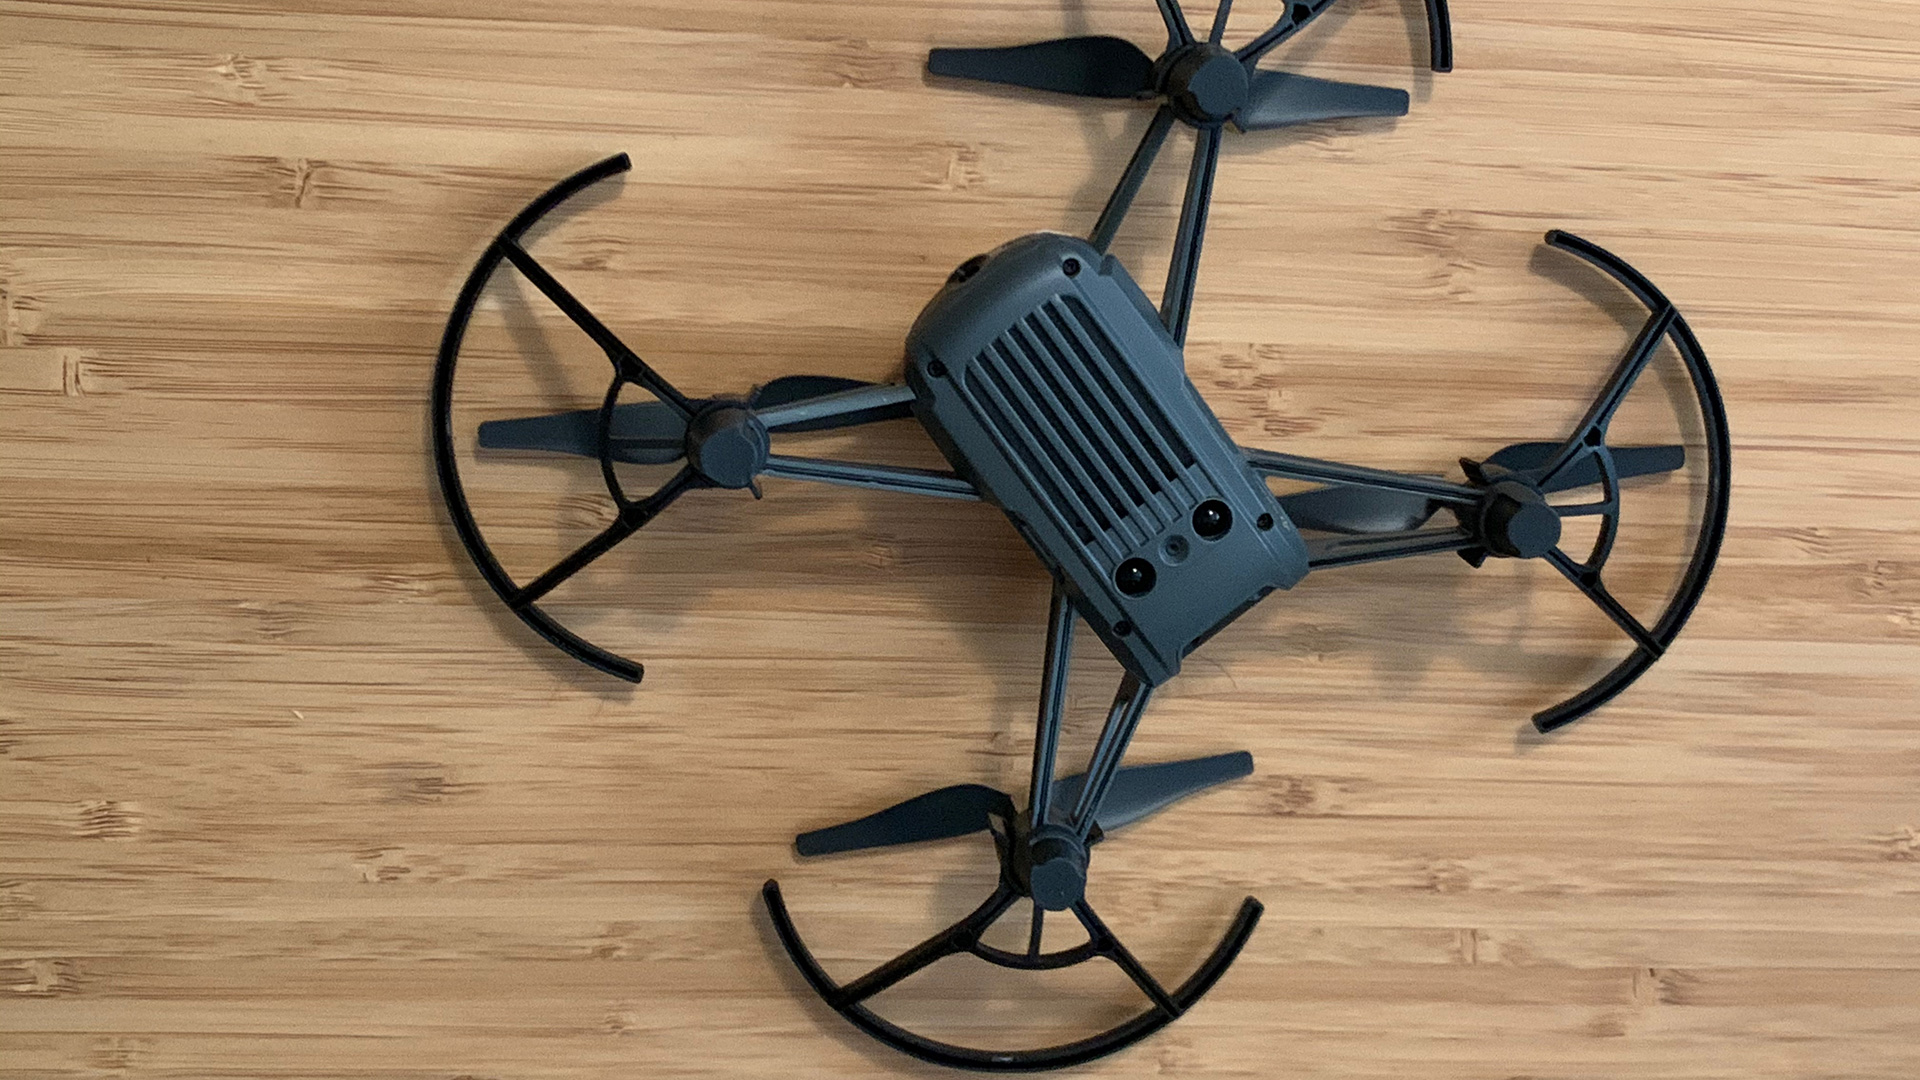 moves and Tello T3 review: incredible | Ryze stability precise drone